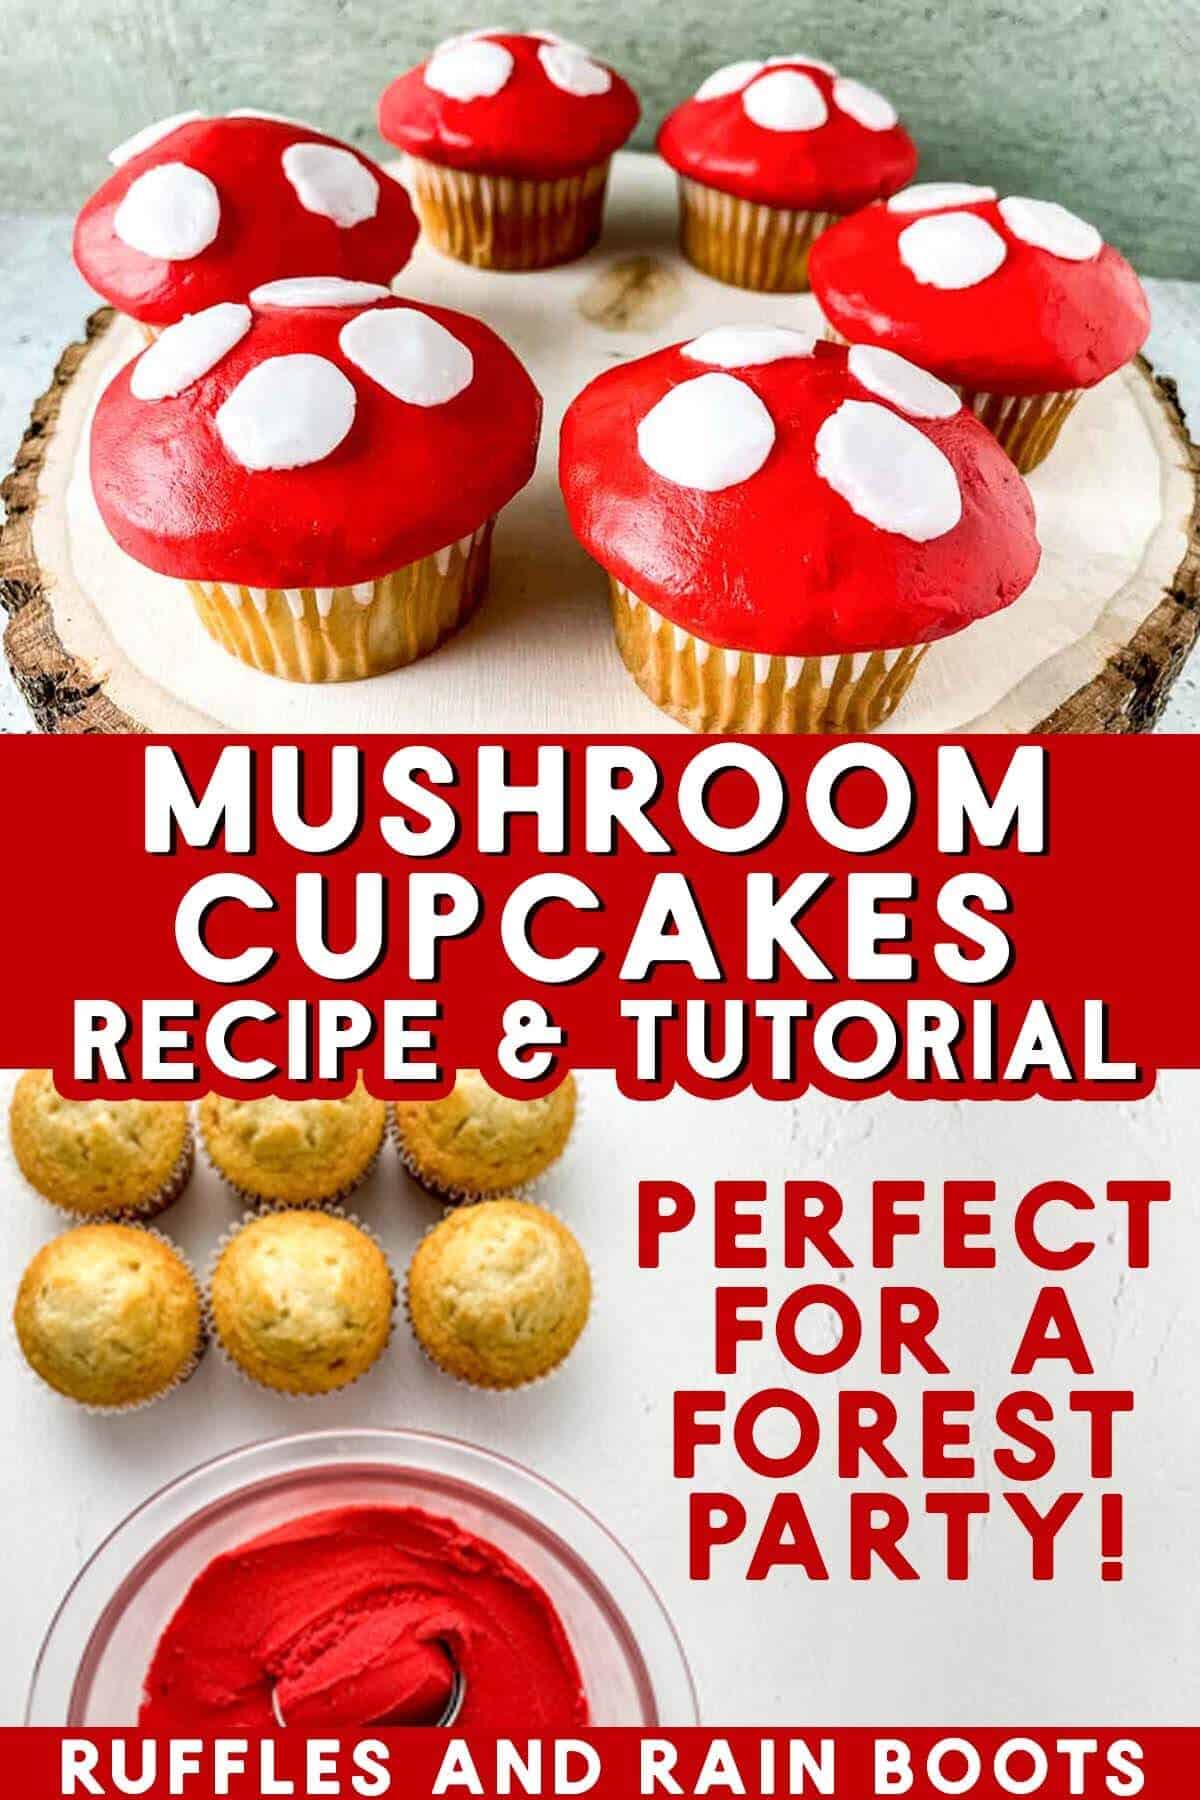 Vertical split image of red and white mushroom cupcakes on wood round.